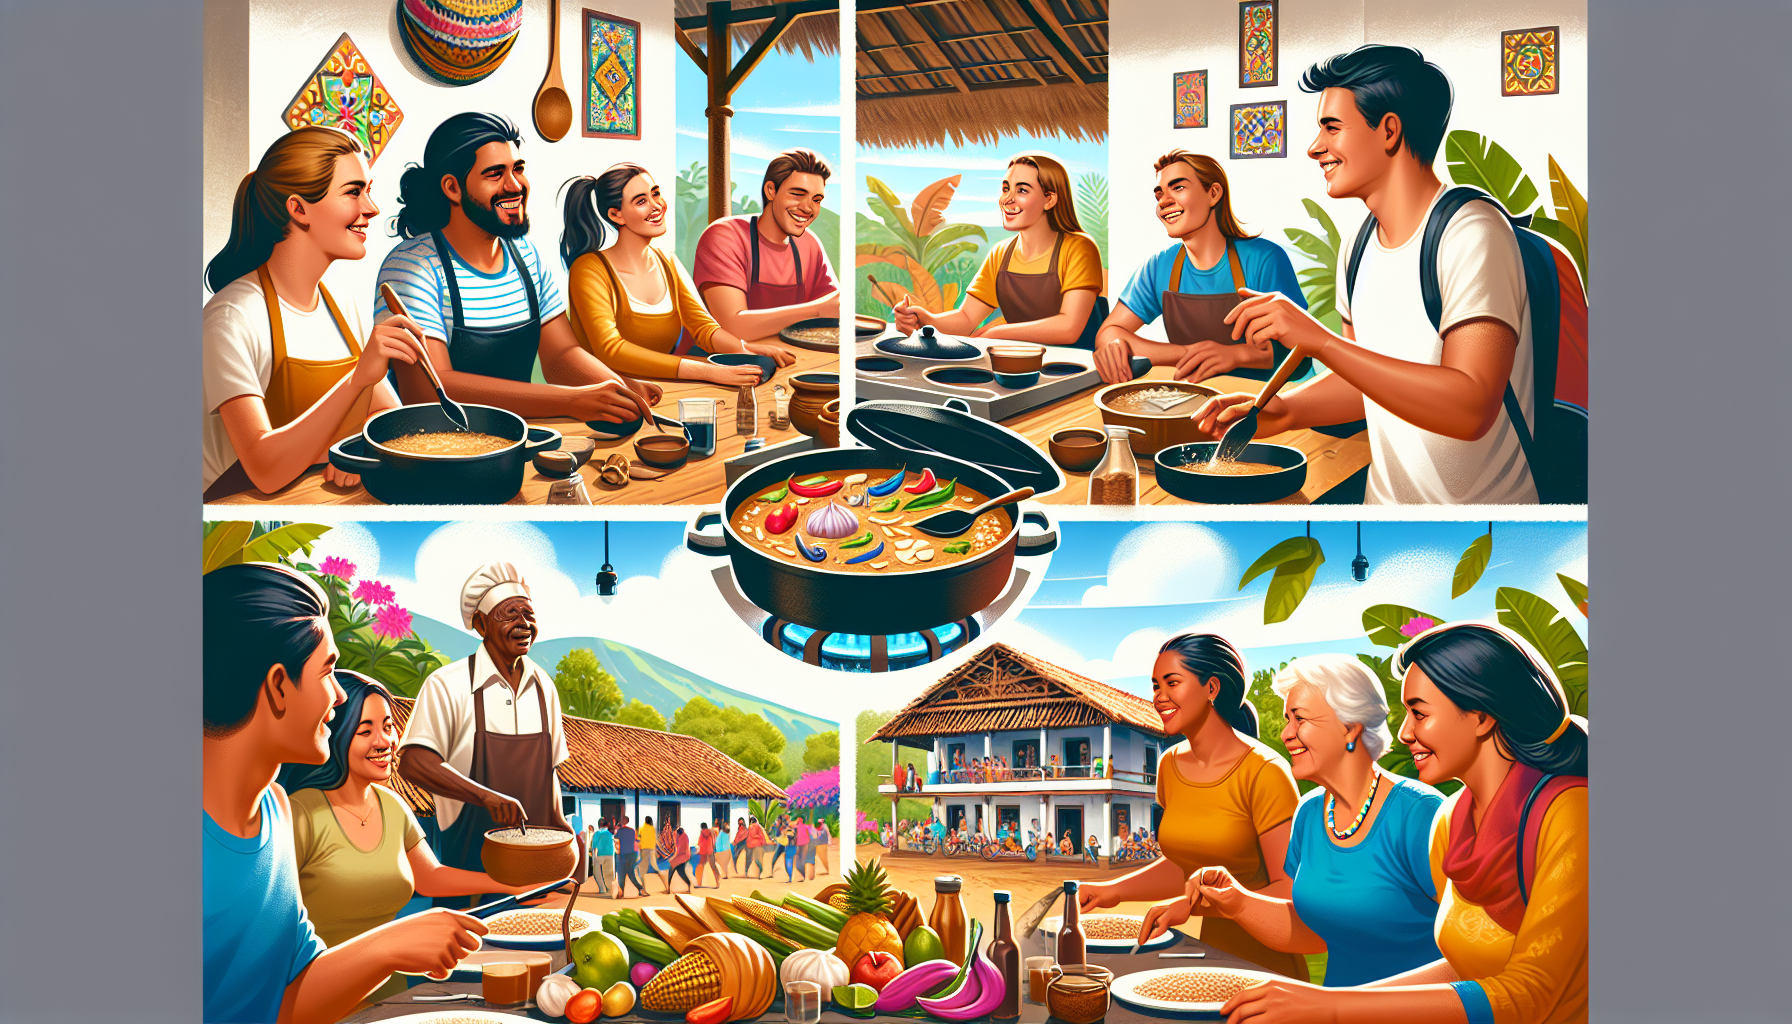 What Are The Options For Nicaraguan Cooking Classes Tailored For Tourists?